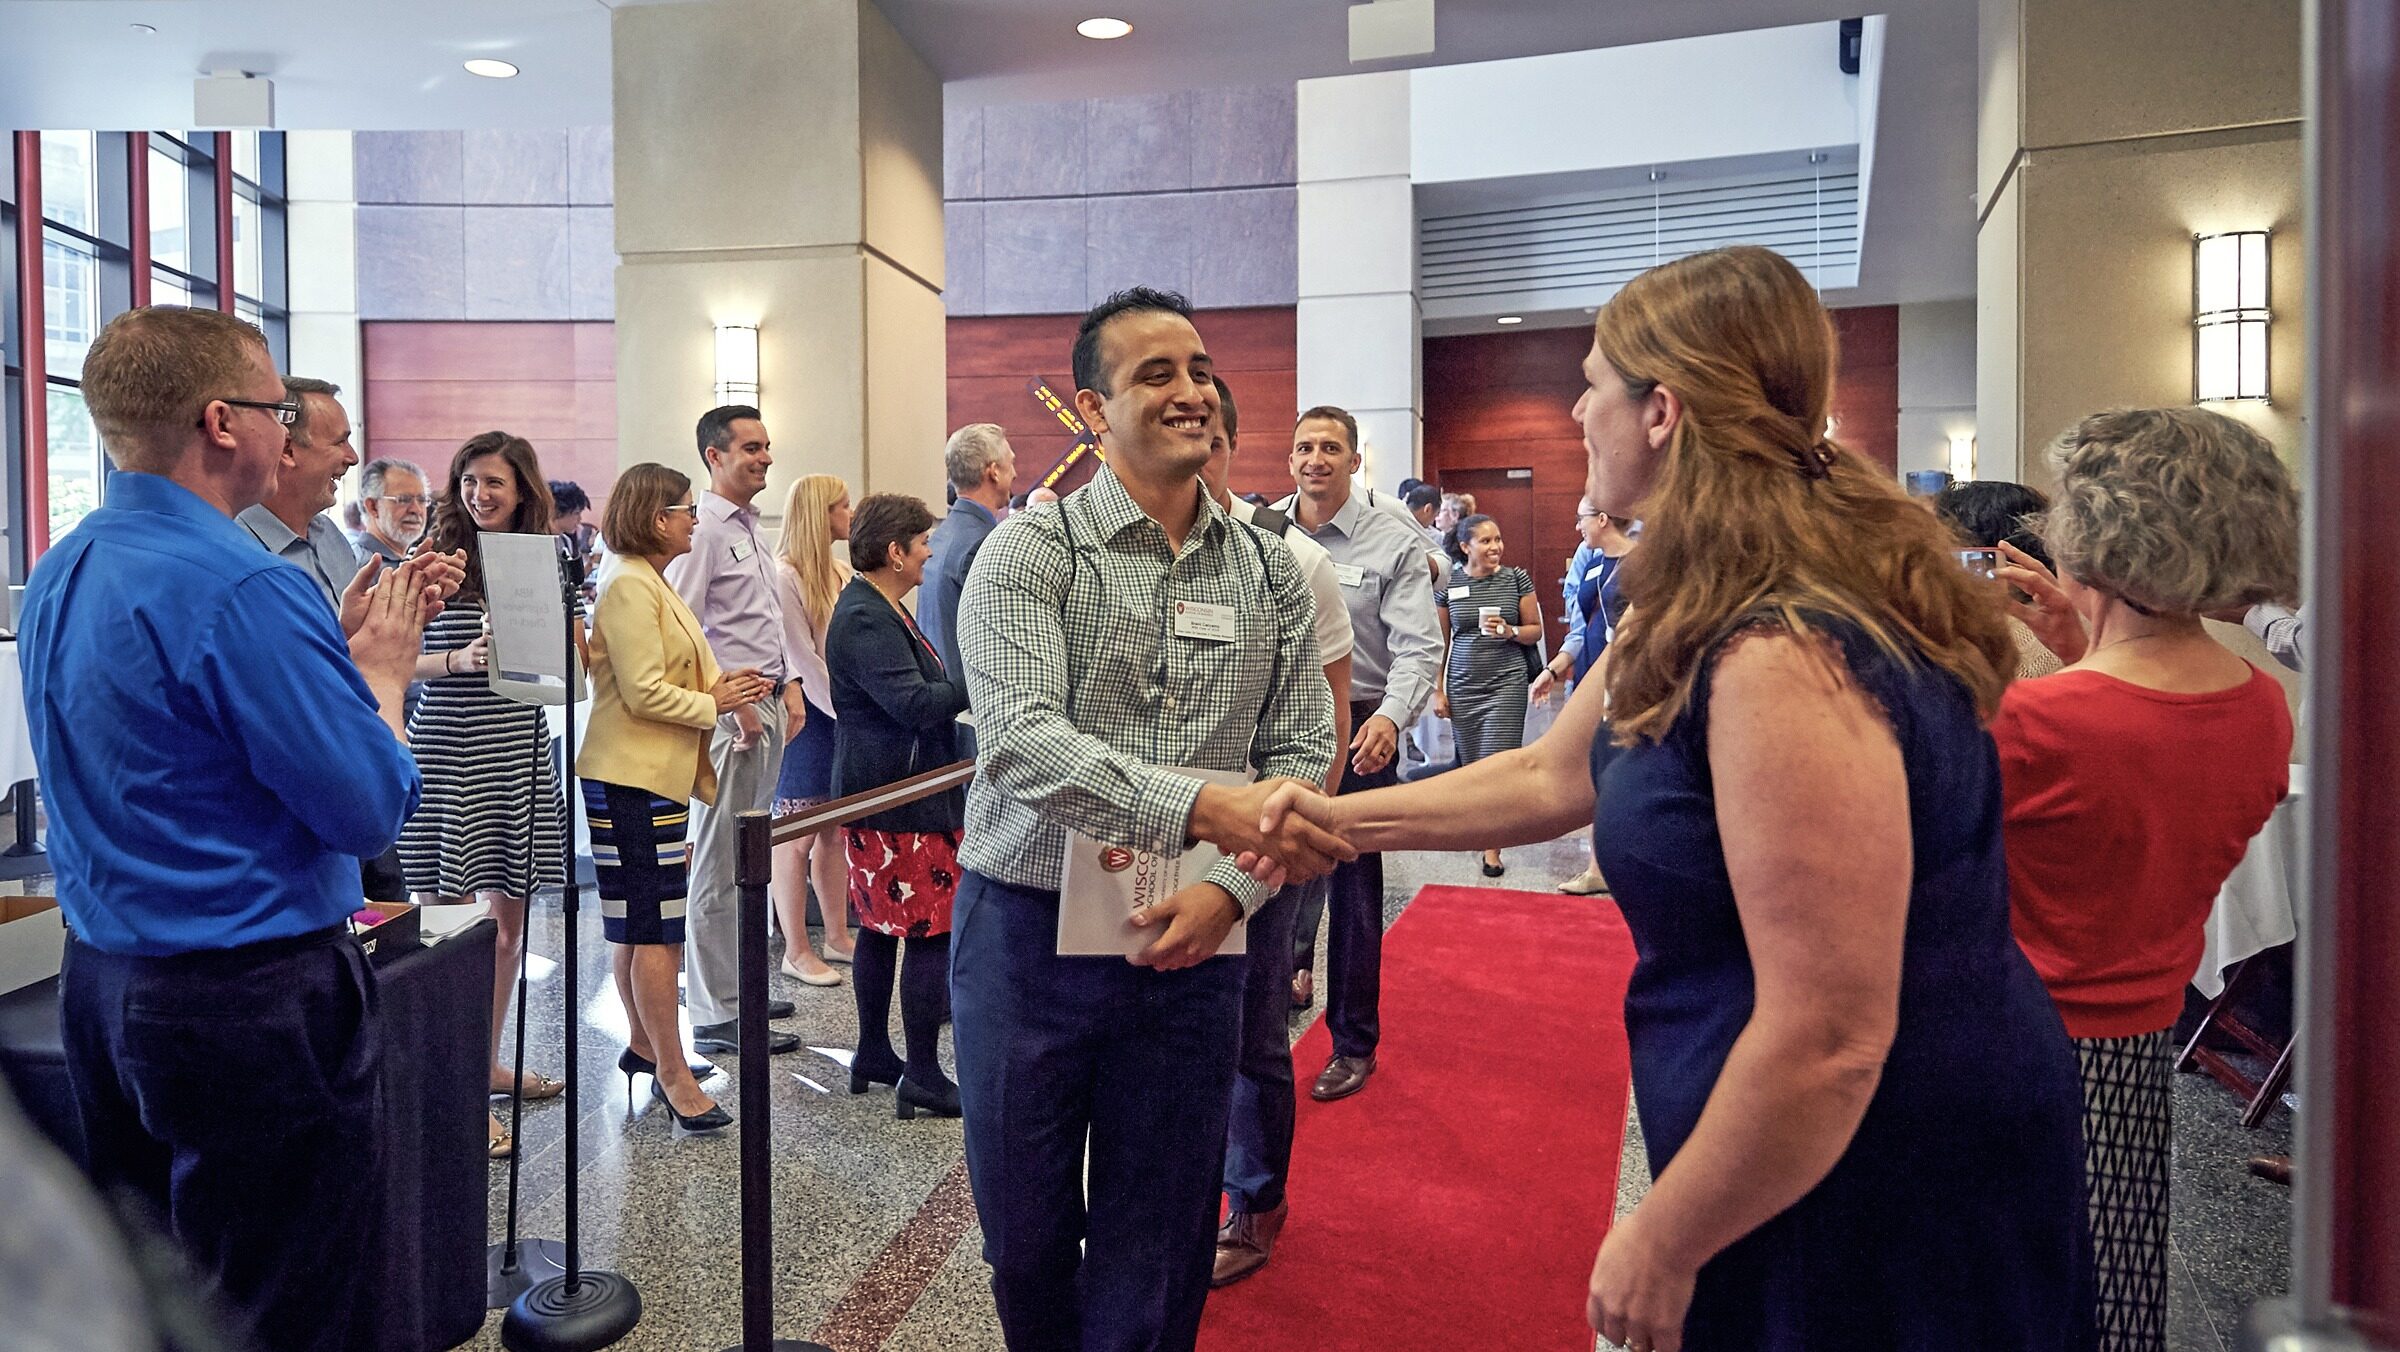 MBA program staff and faculty greet new students at orientation